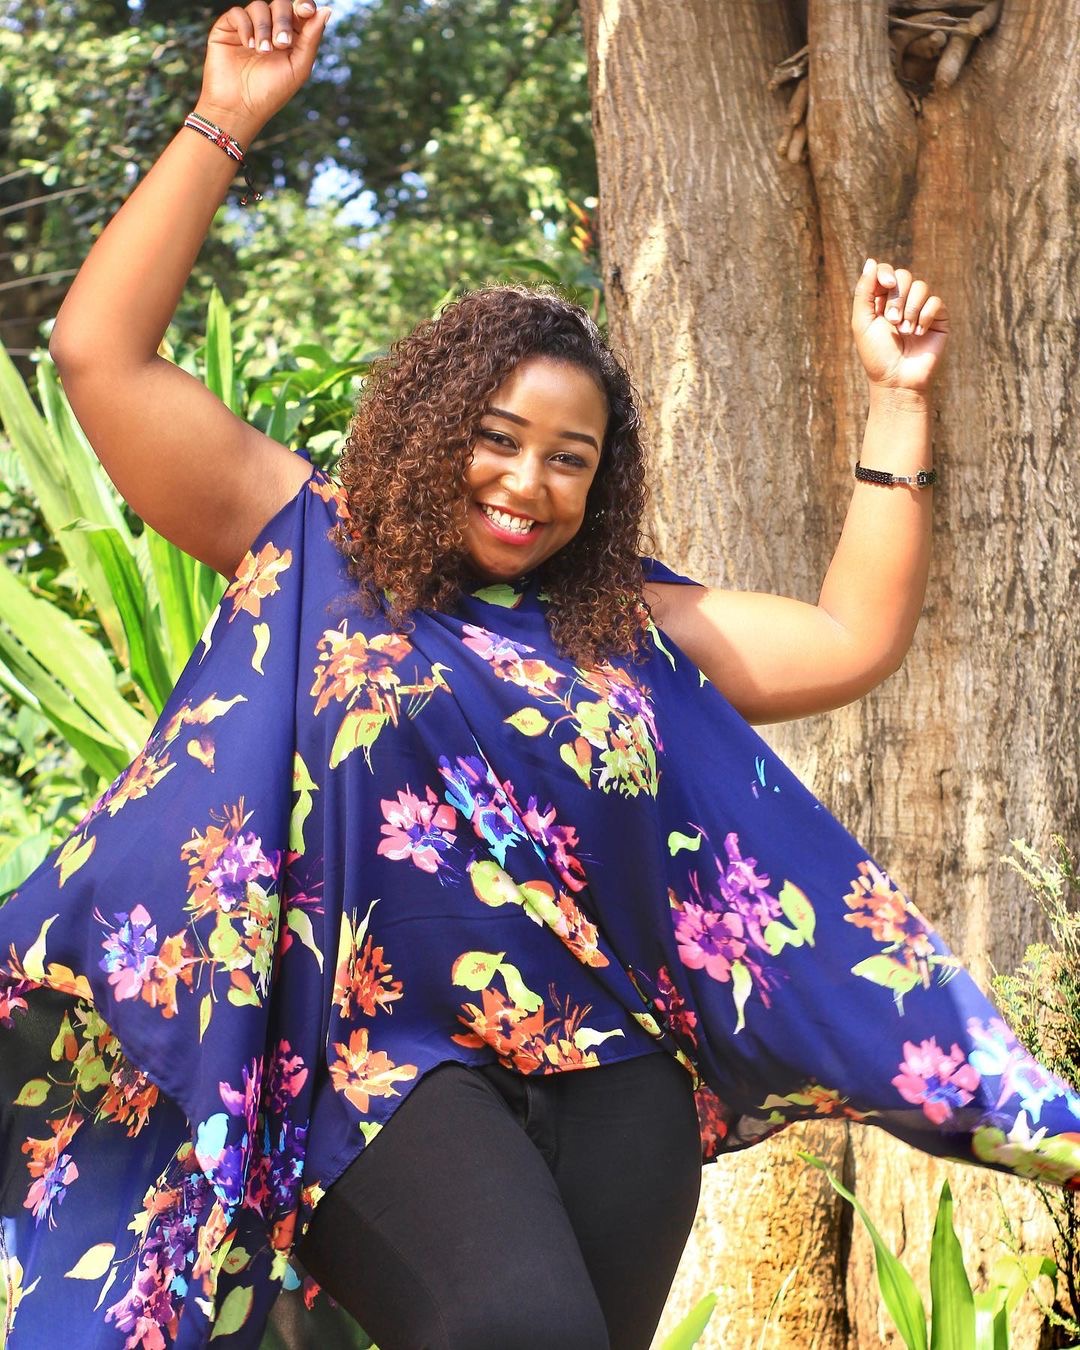 Betty Kyallo explaining her failed relationships is hilarious